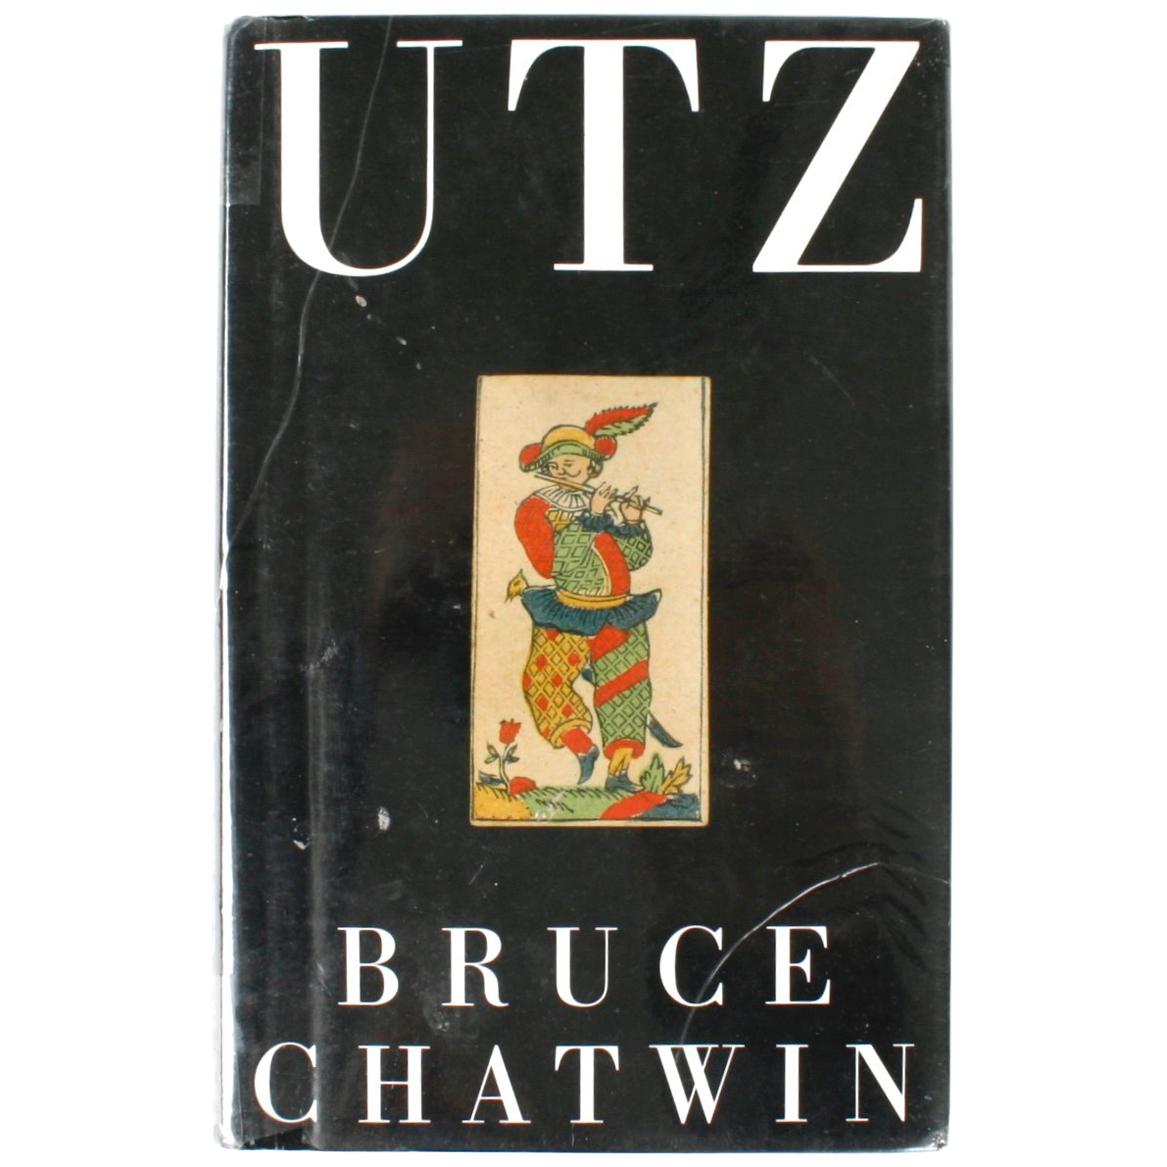 Utz by Bruce Chatwin, First Edition